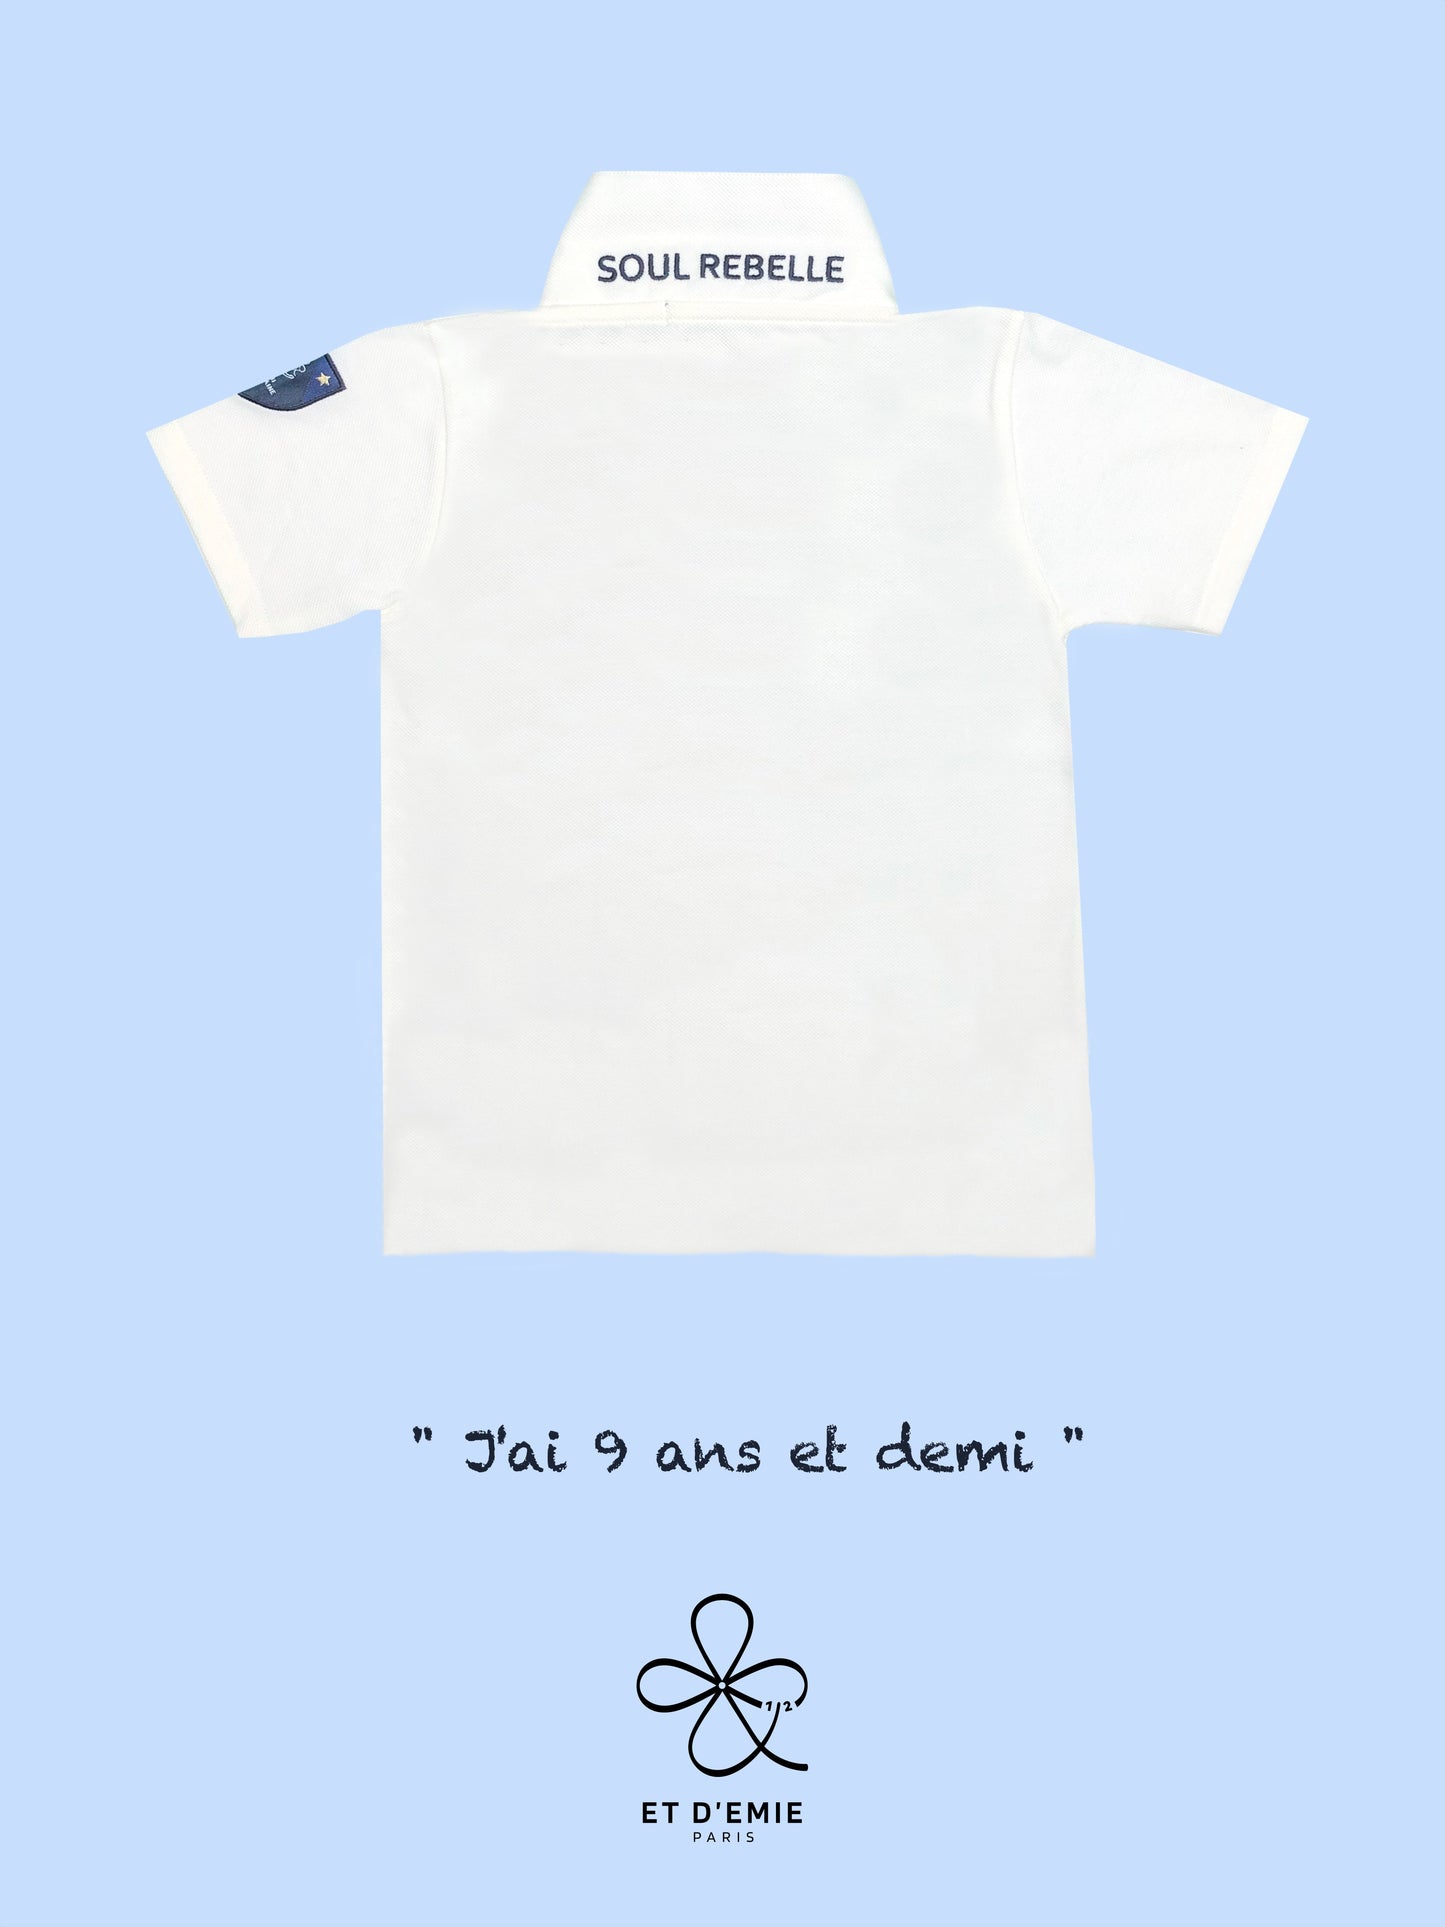 MINI CAPTAIN - SOUL REBELLE polo shirt "I'm 9 and a half years old" embroidered in ivory organic pique cotton🇫🇷